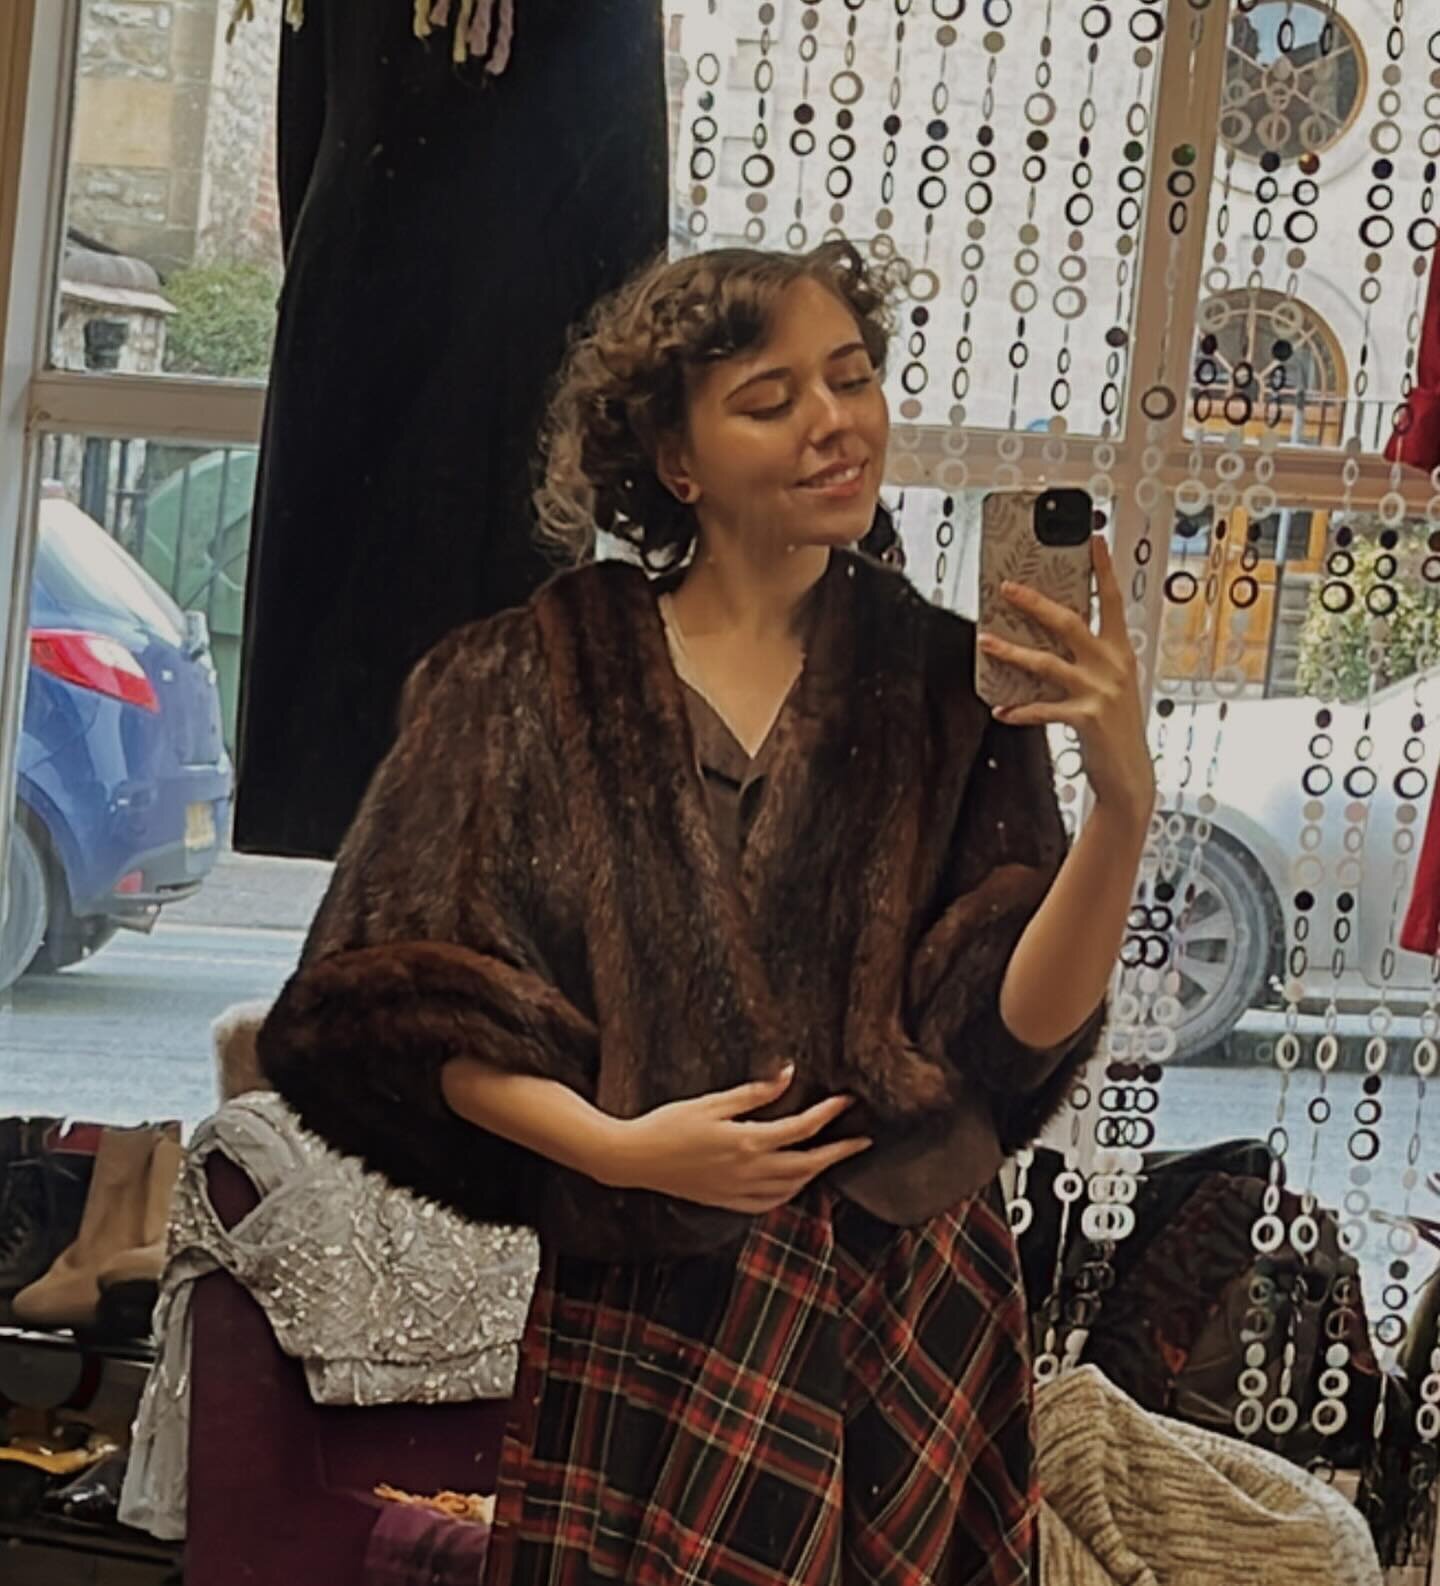 🤎🤎Another satisfied customer in their gorgeous new coat from @retroroomoxford 🤎🤎

#coat #vintage #vintagecoat #vintageshop #1940s #1950s #secondhand #retro #retrocoat #fancydress